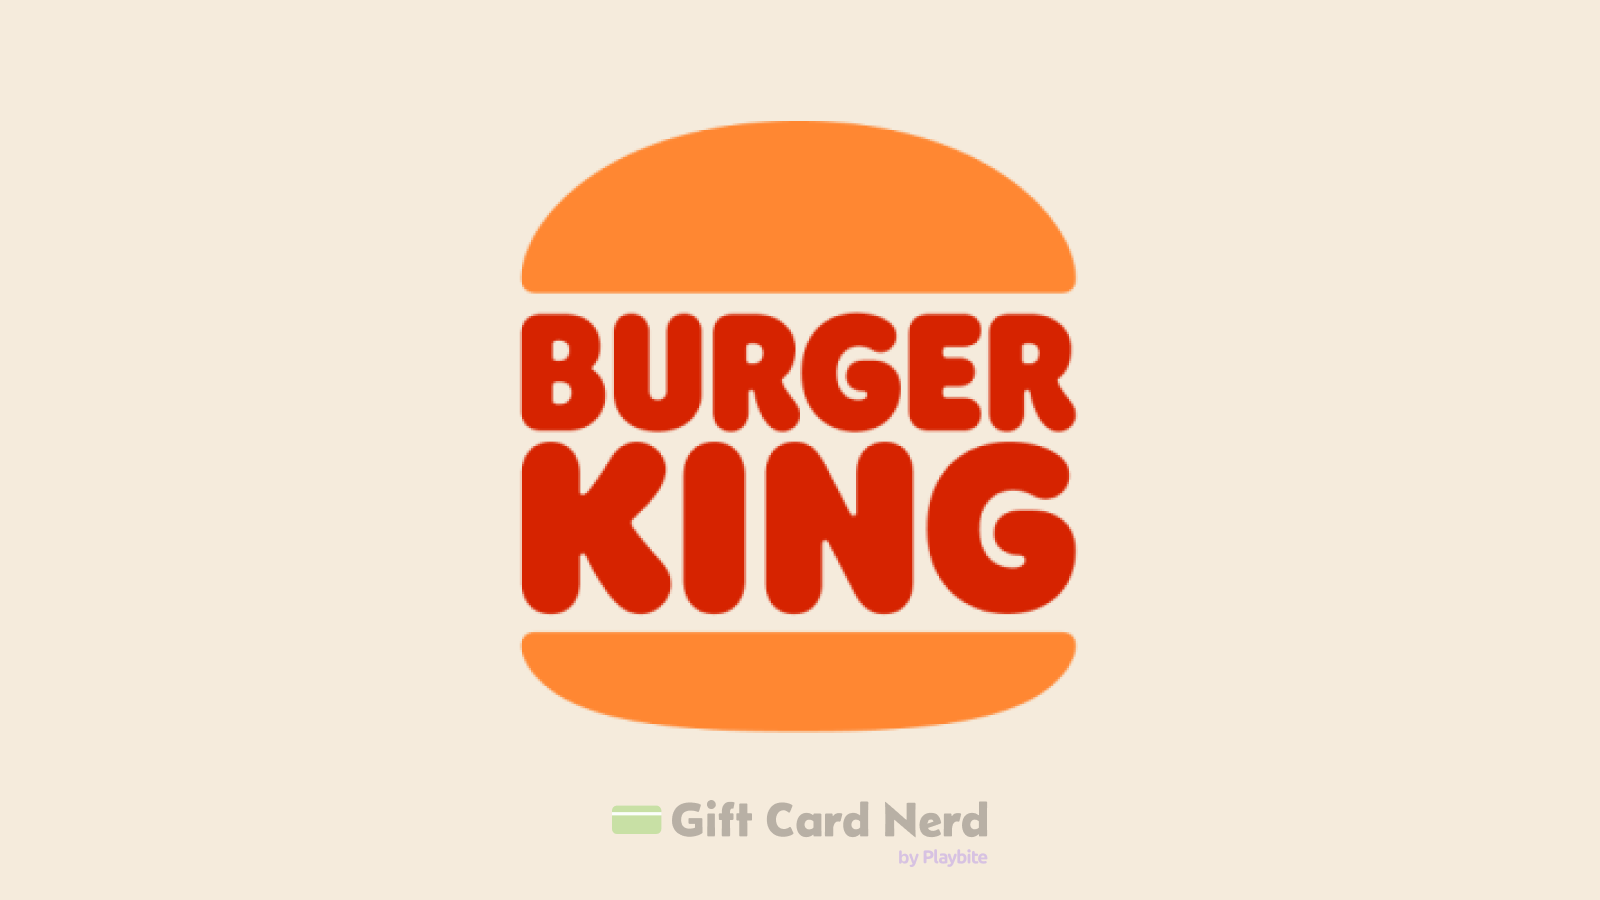 Can You Use a Burger King Gift Card on Cash App?